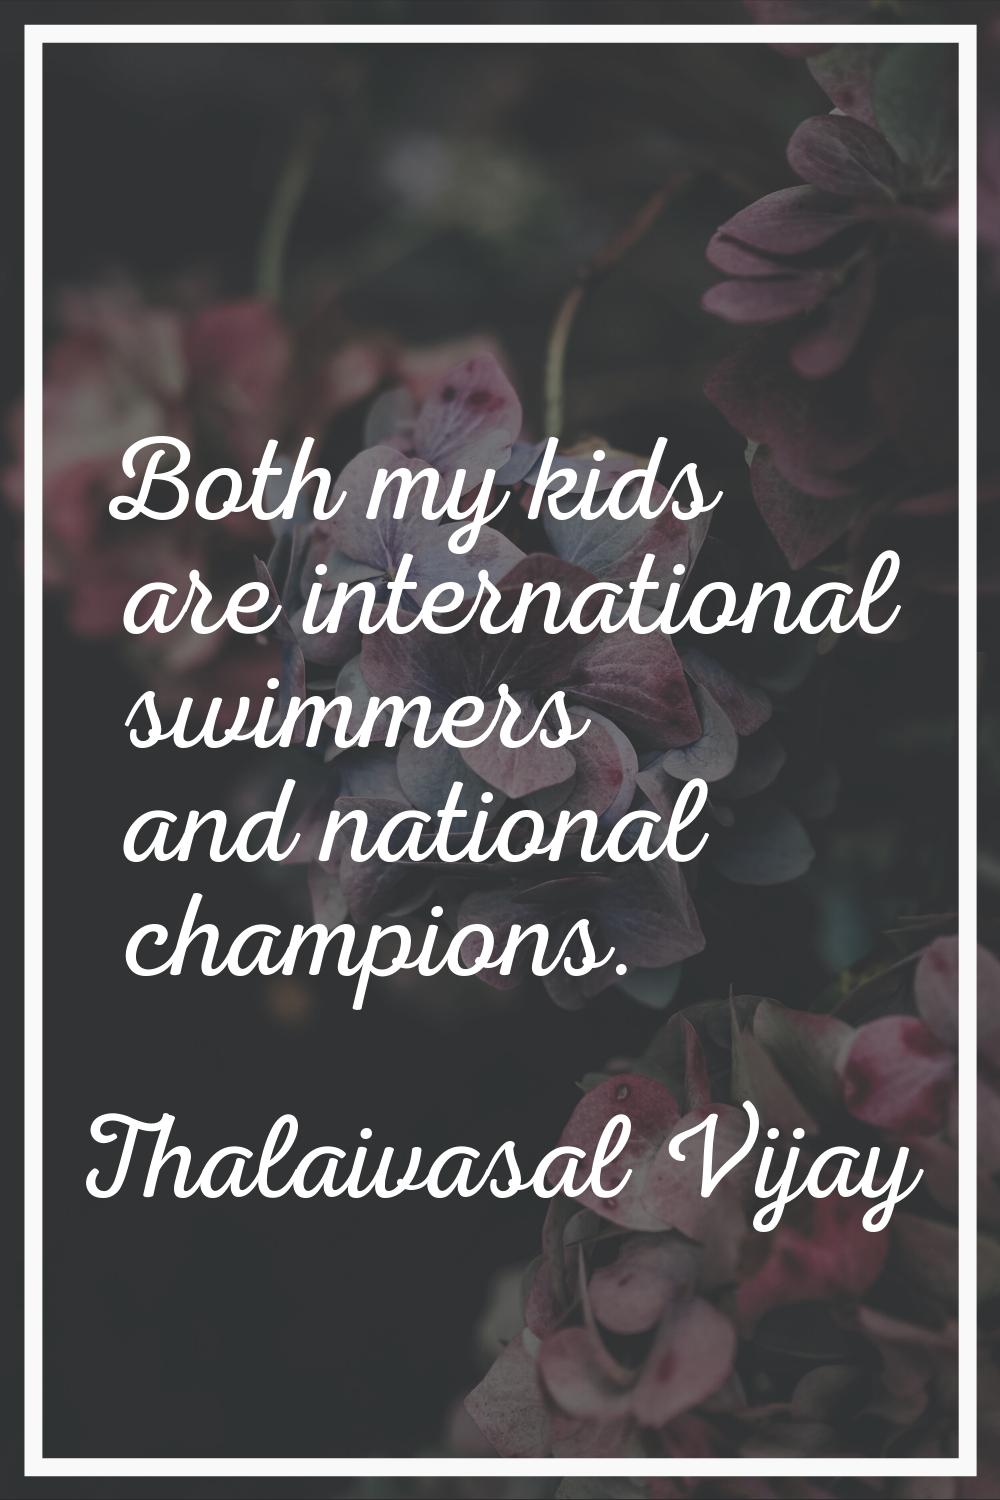 Both my kids are international swimmers and national champions.